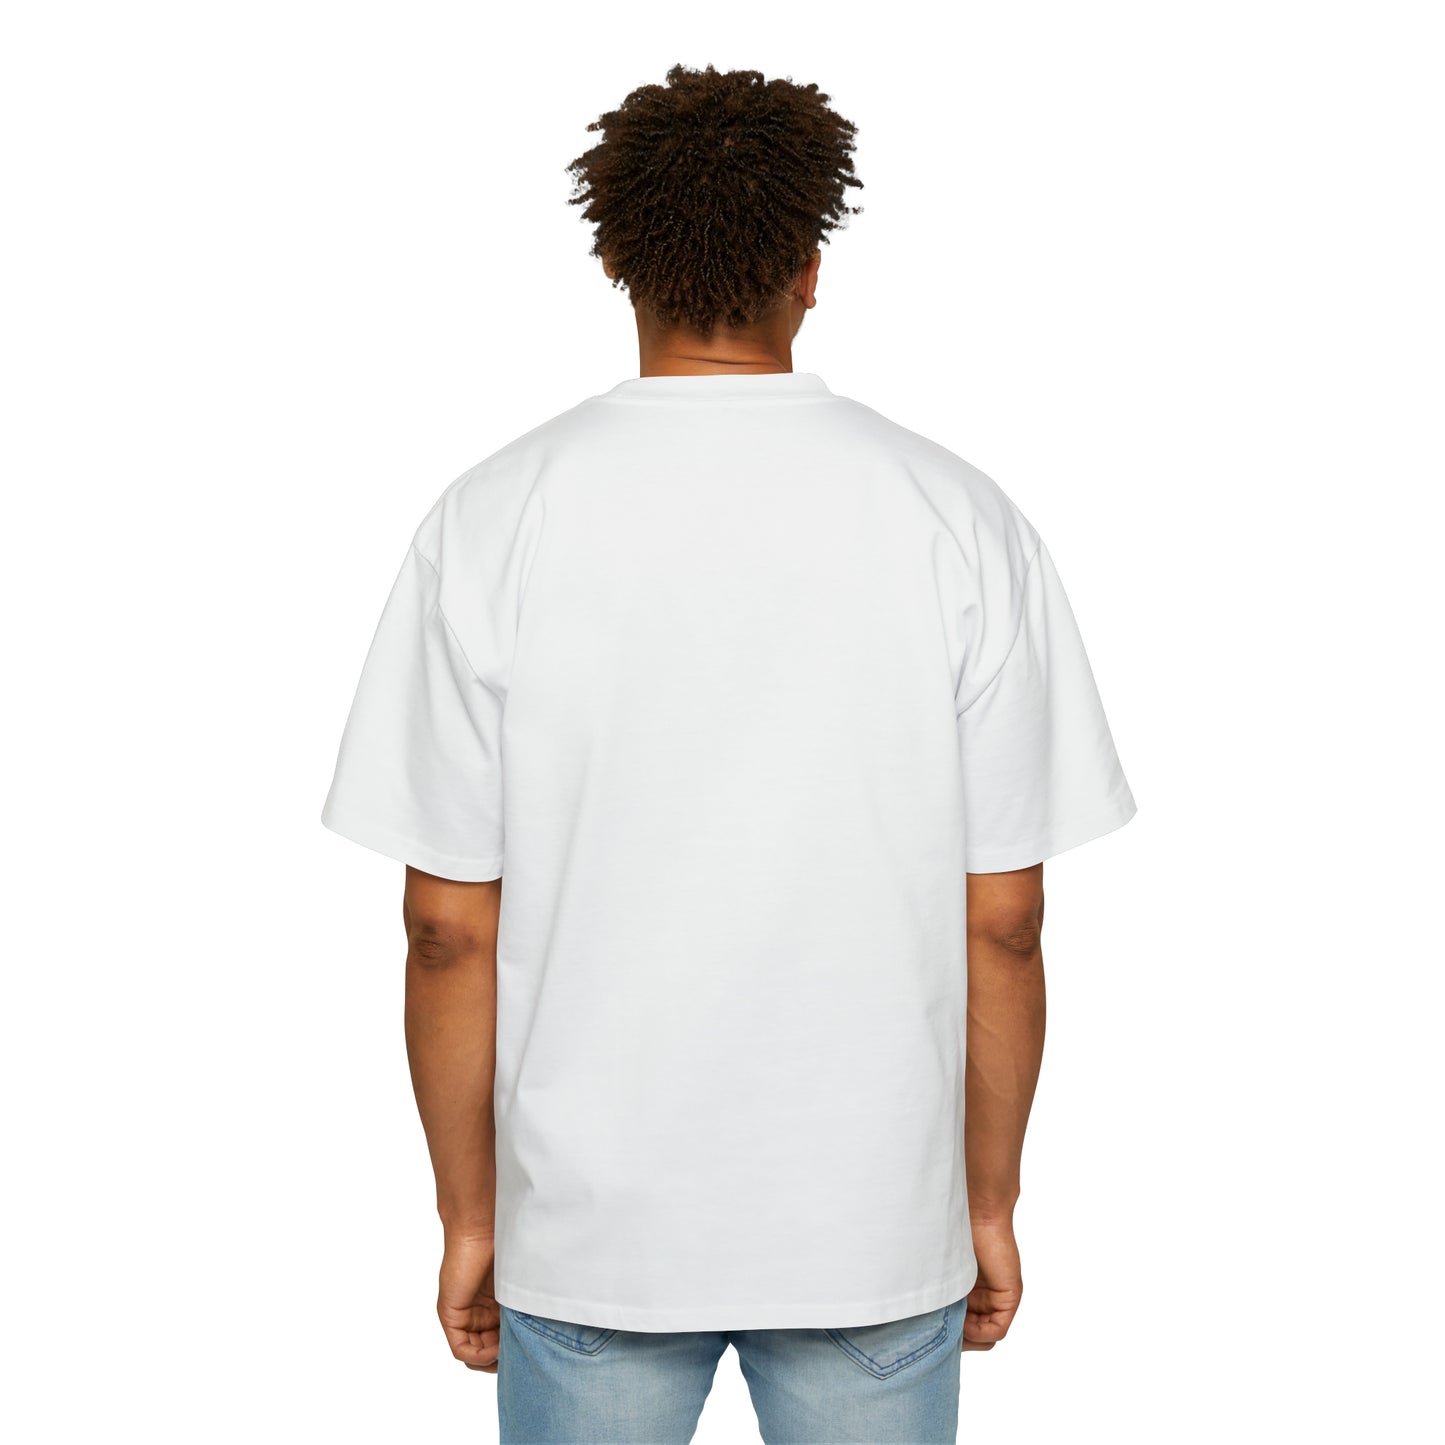 Anime Style Art Men's Heavy Oversized Tee- "Front Cover Chick"